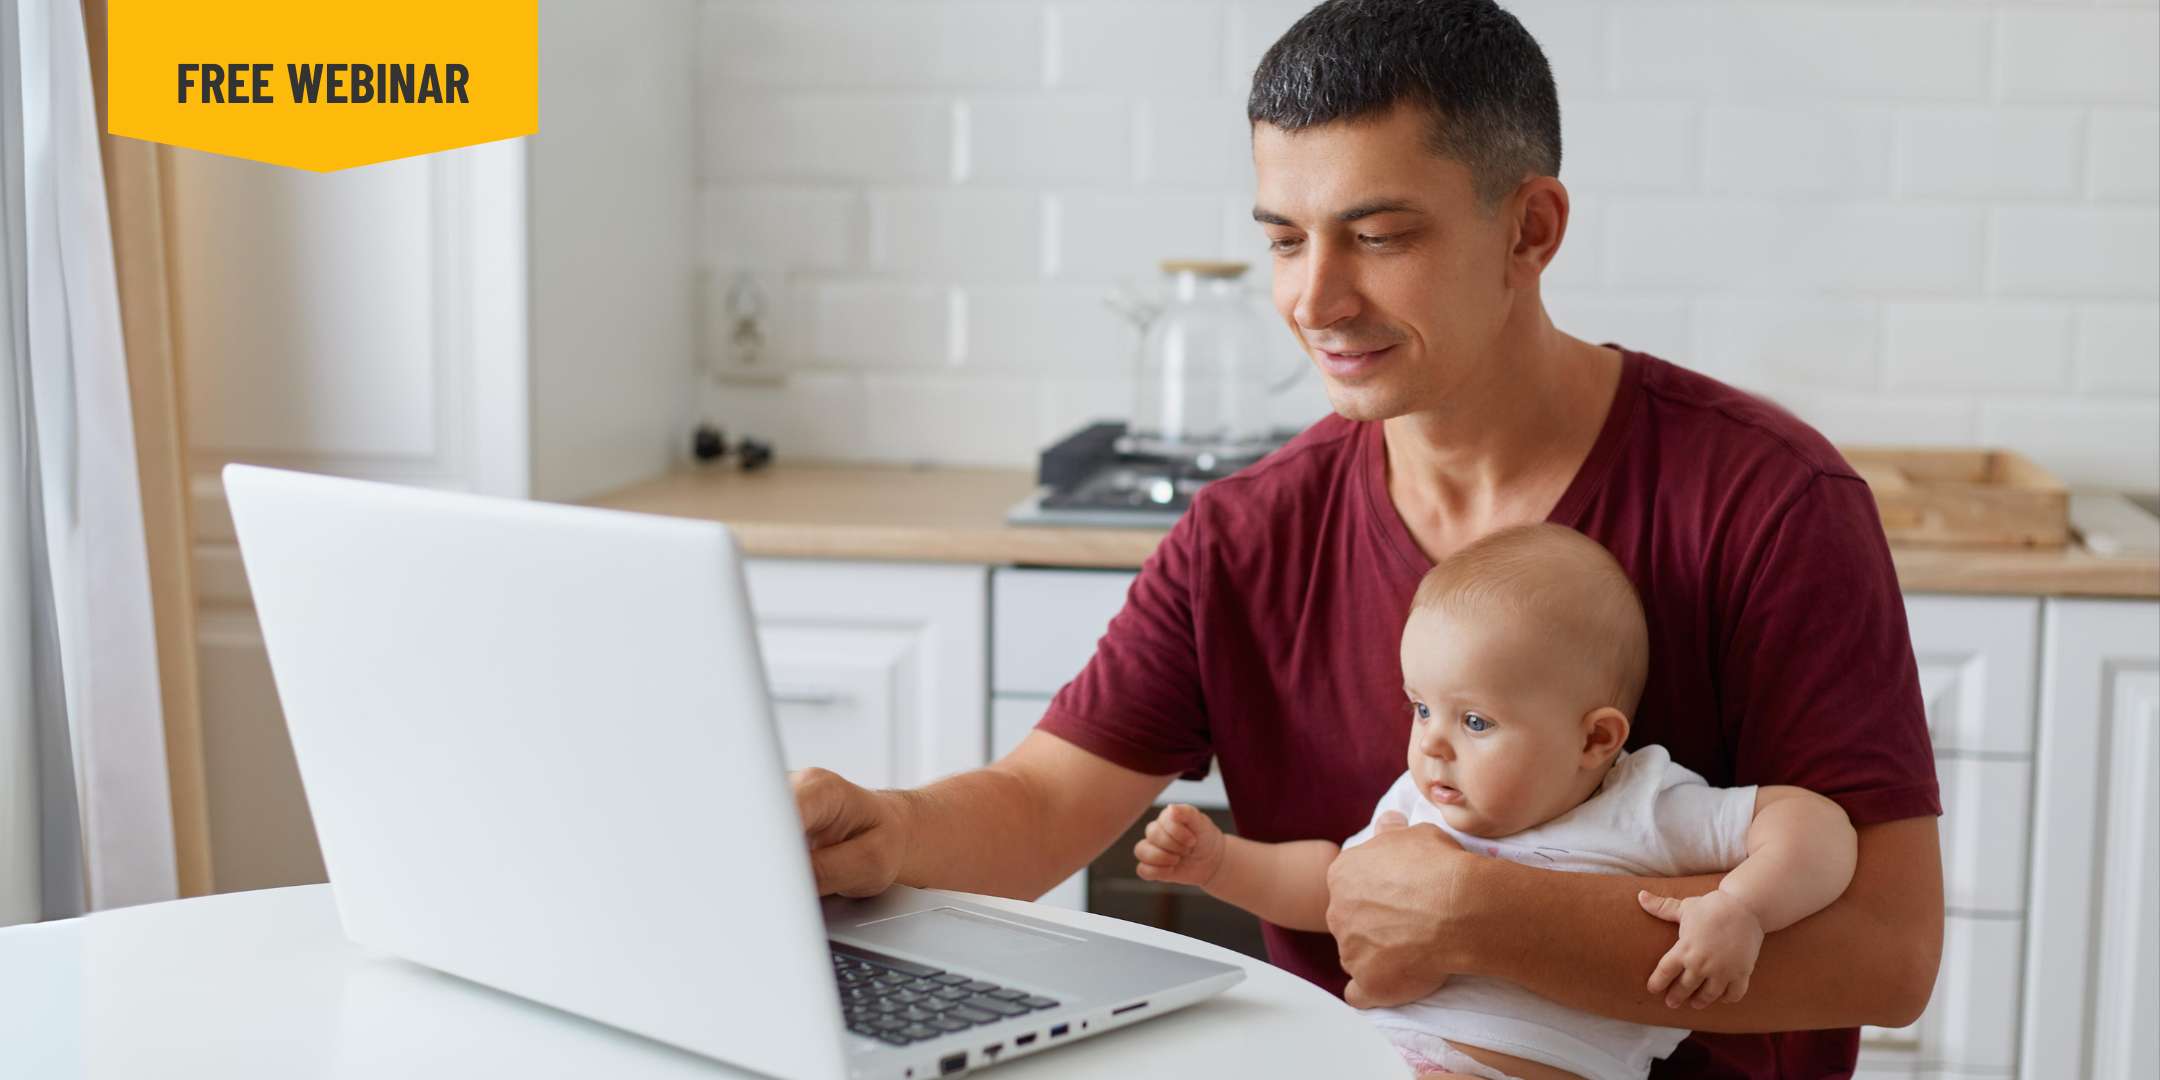 a person holding a baby and sitting at a table with a laptop